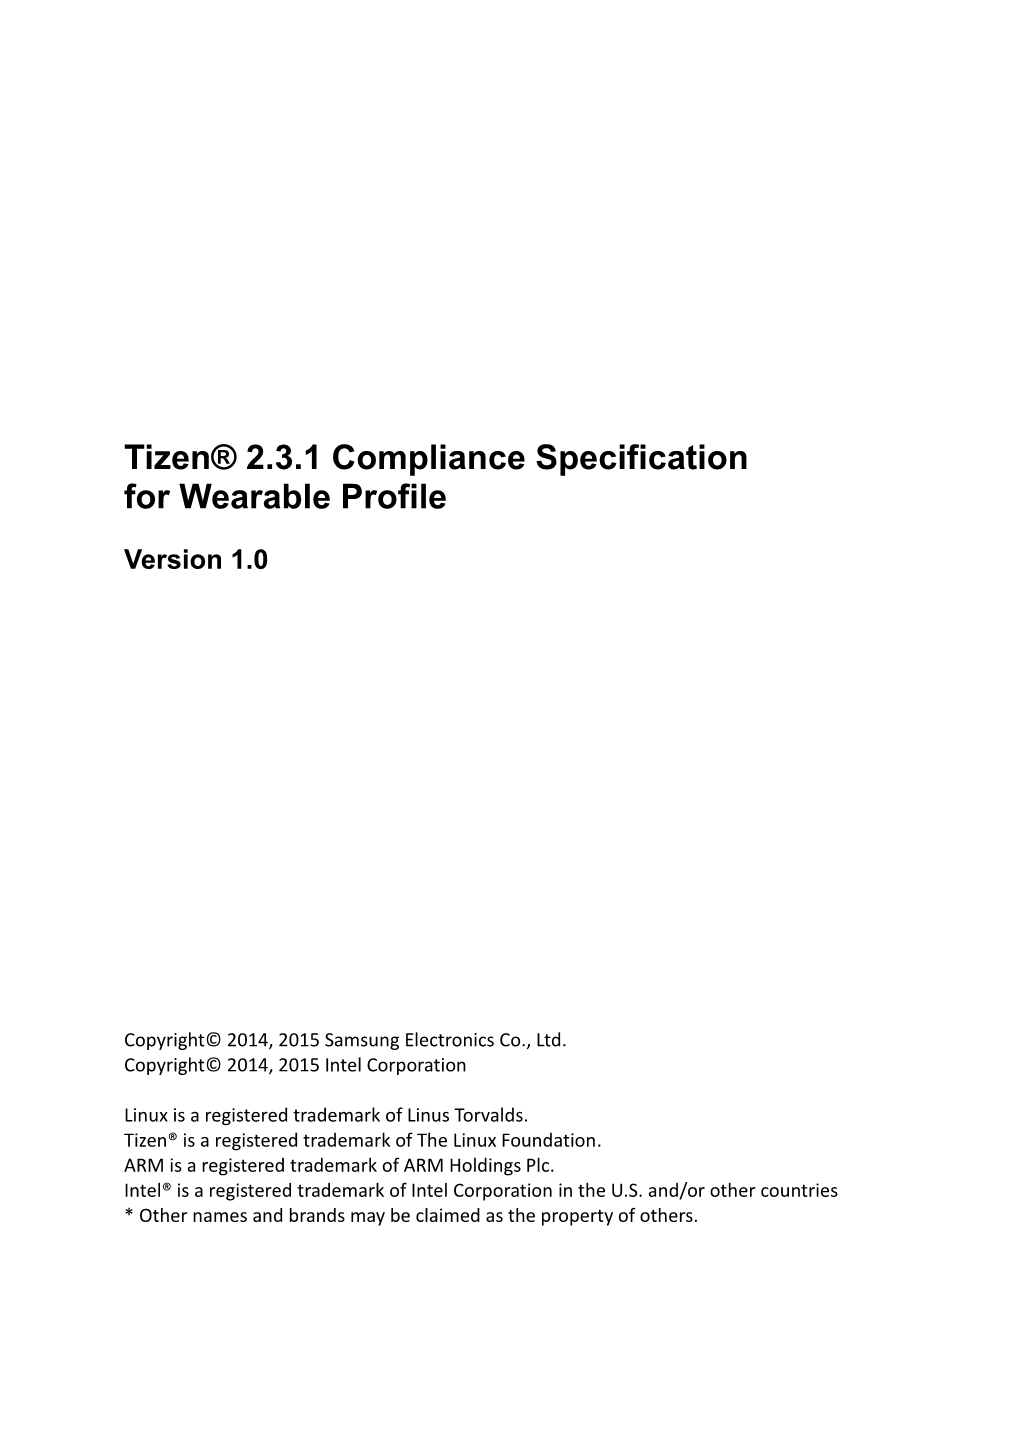 Tizen 2.3.1 Compliance Specification for Wearable Profile Term Definition STB Television Set-Top Box, a Target of the TV Profile